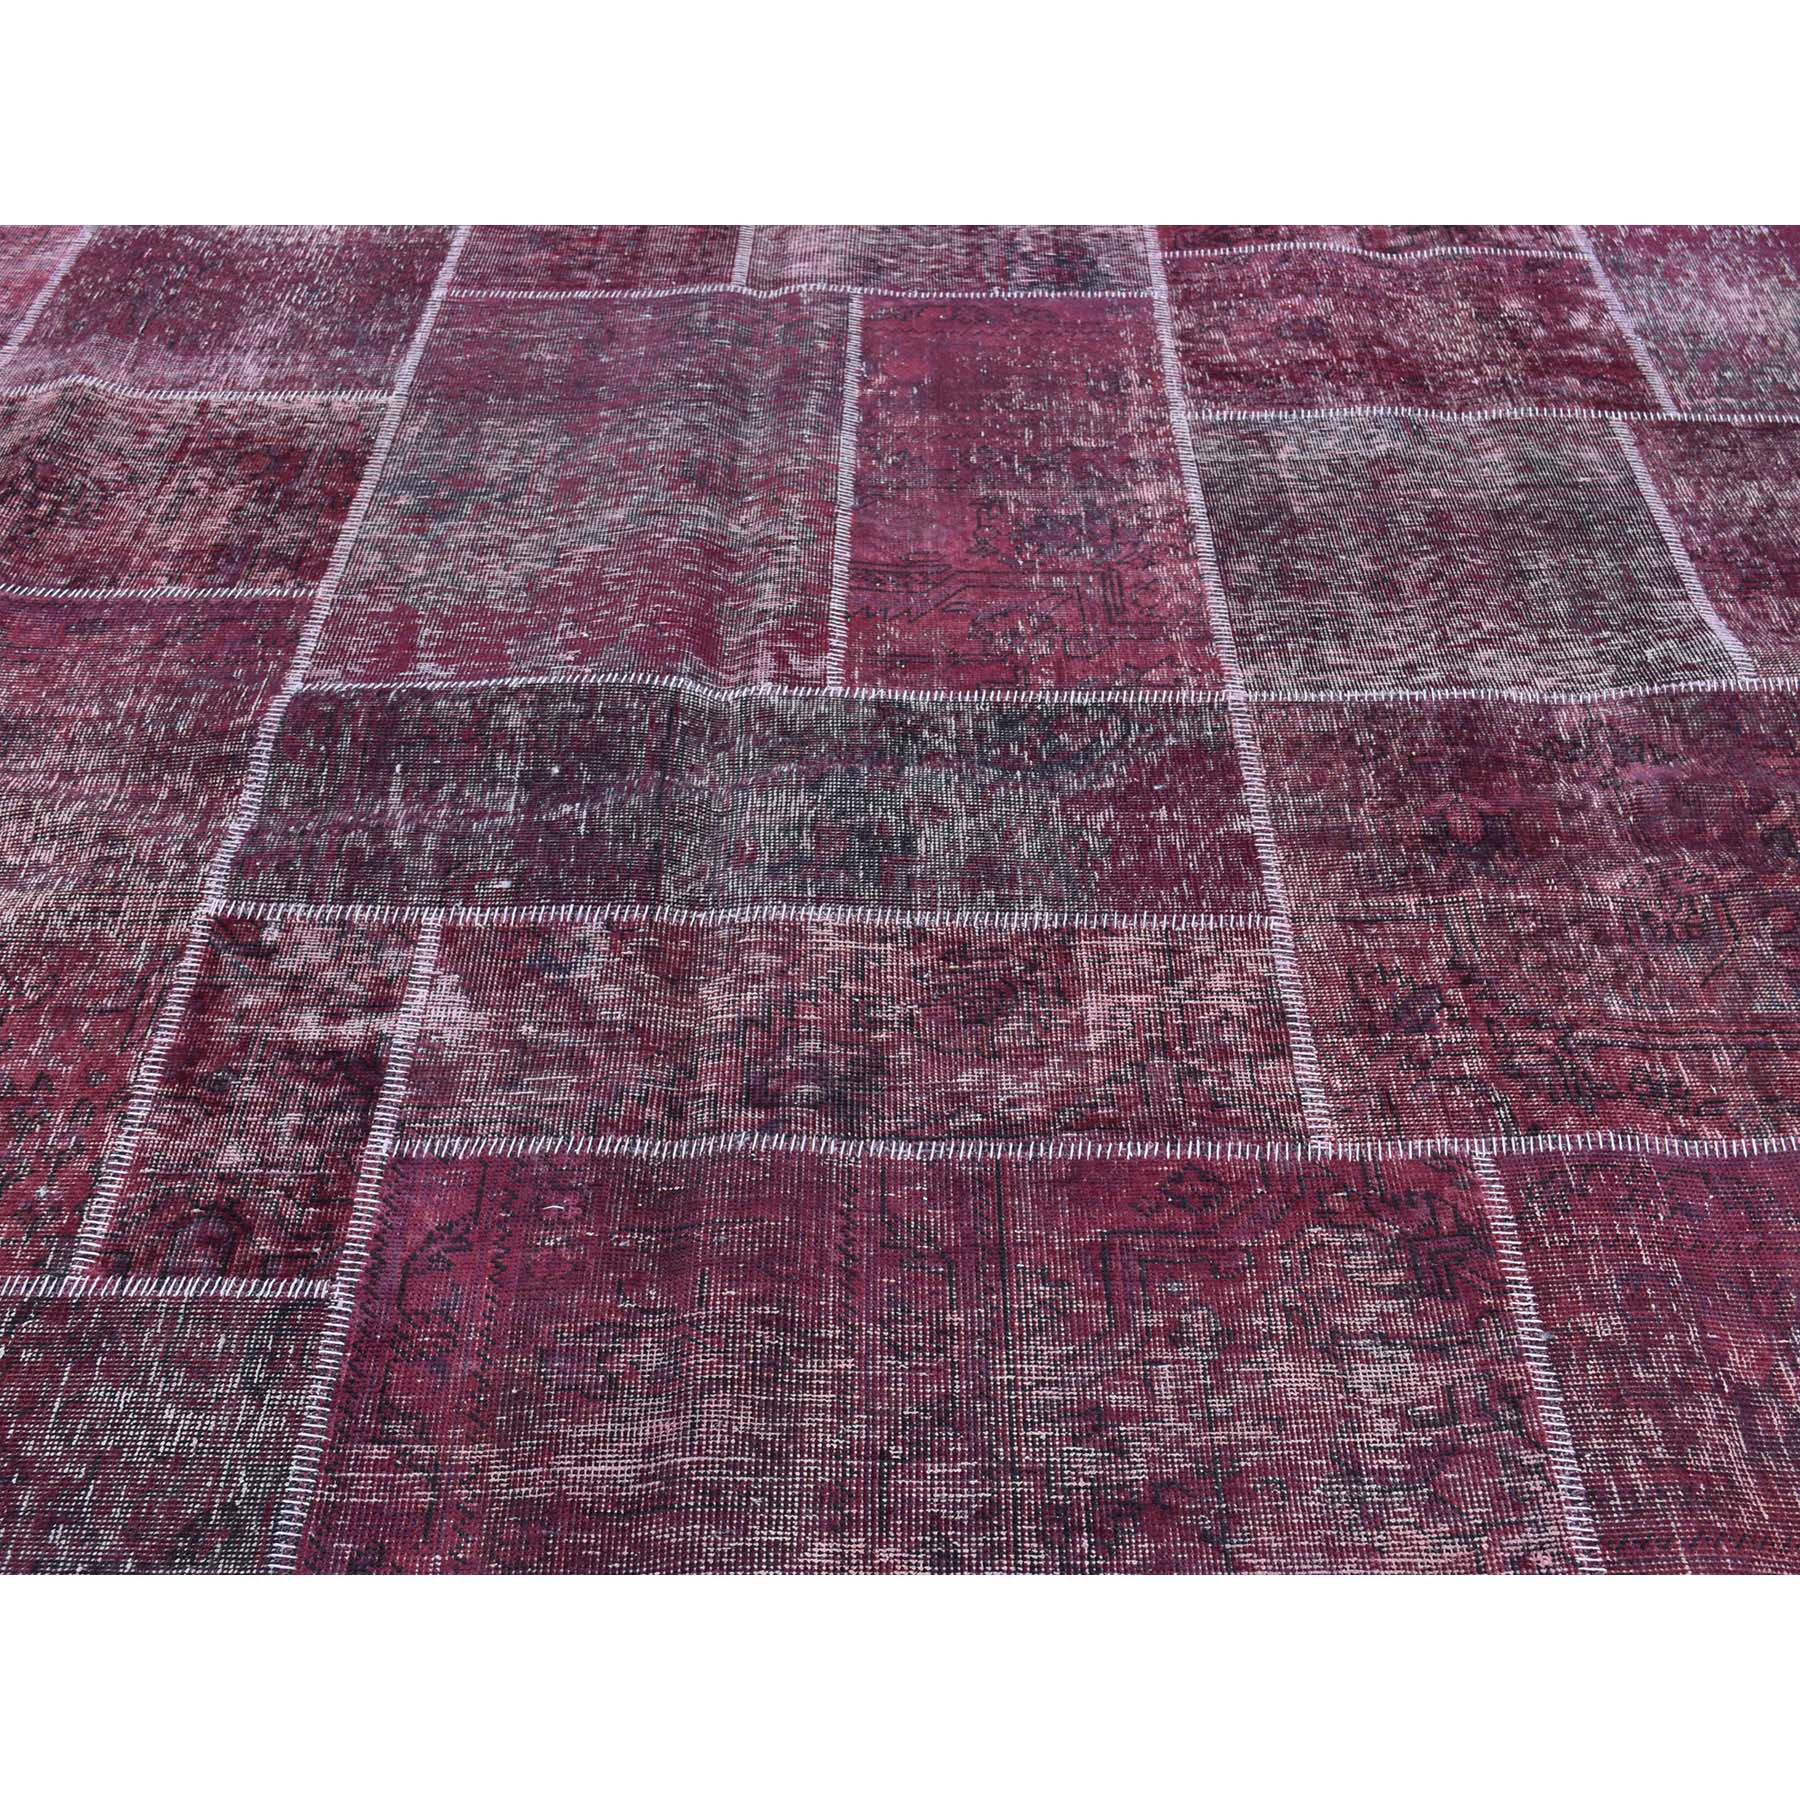 9-1 x12-10  Persian Overdyed Patchwork Handmade Pure Wool Vintage Carpet 